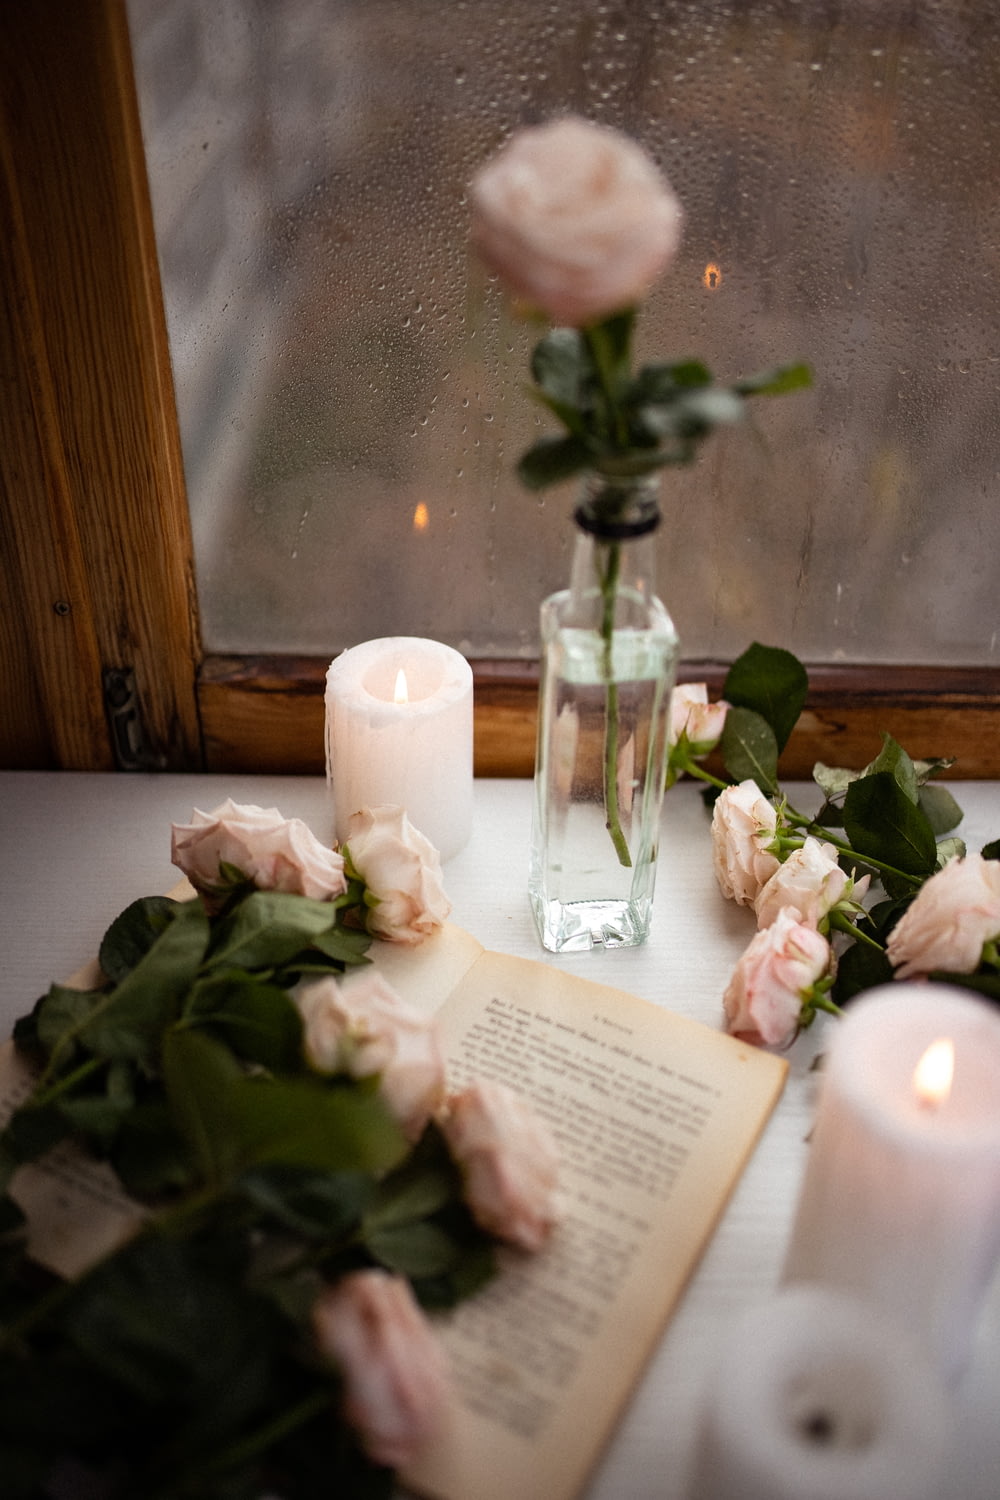 a window sill with roses and a book on it